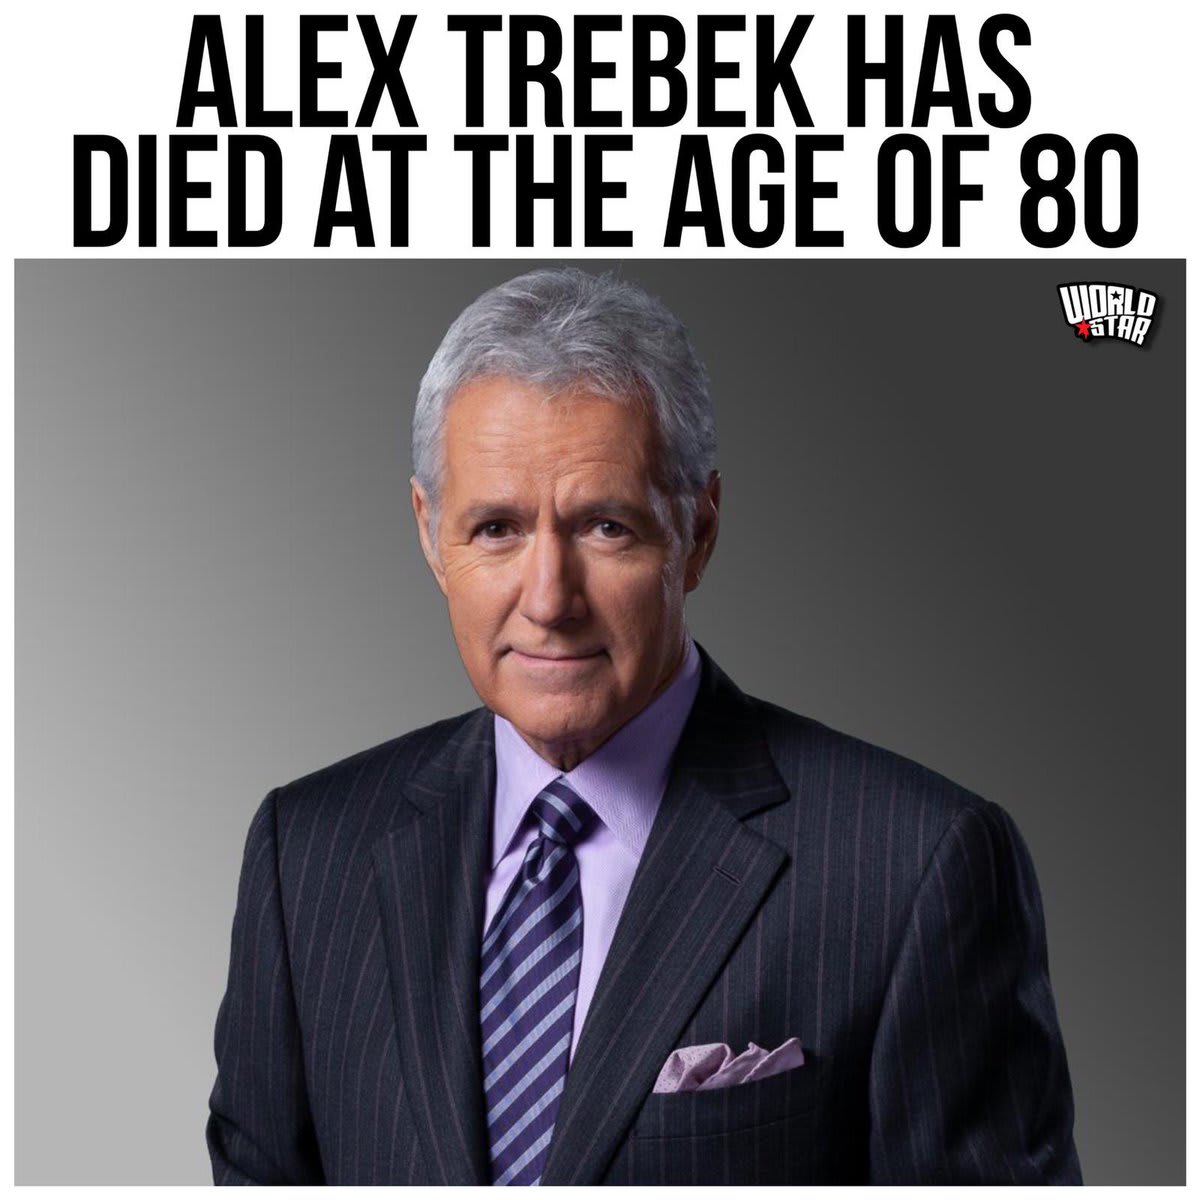 According to reports, AlexTrebek, host of the game show “Jeopardy” has passed away at the age of 80 after a battle with pancreatic cancer. Our thoughts and prayers are with his family and friends.